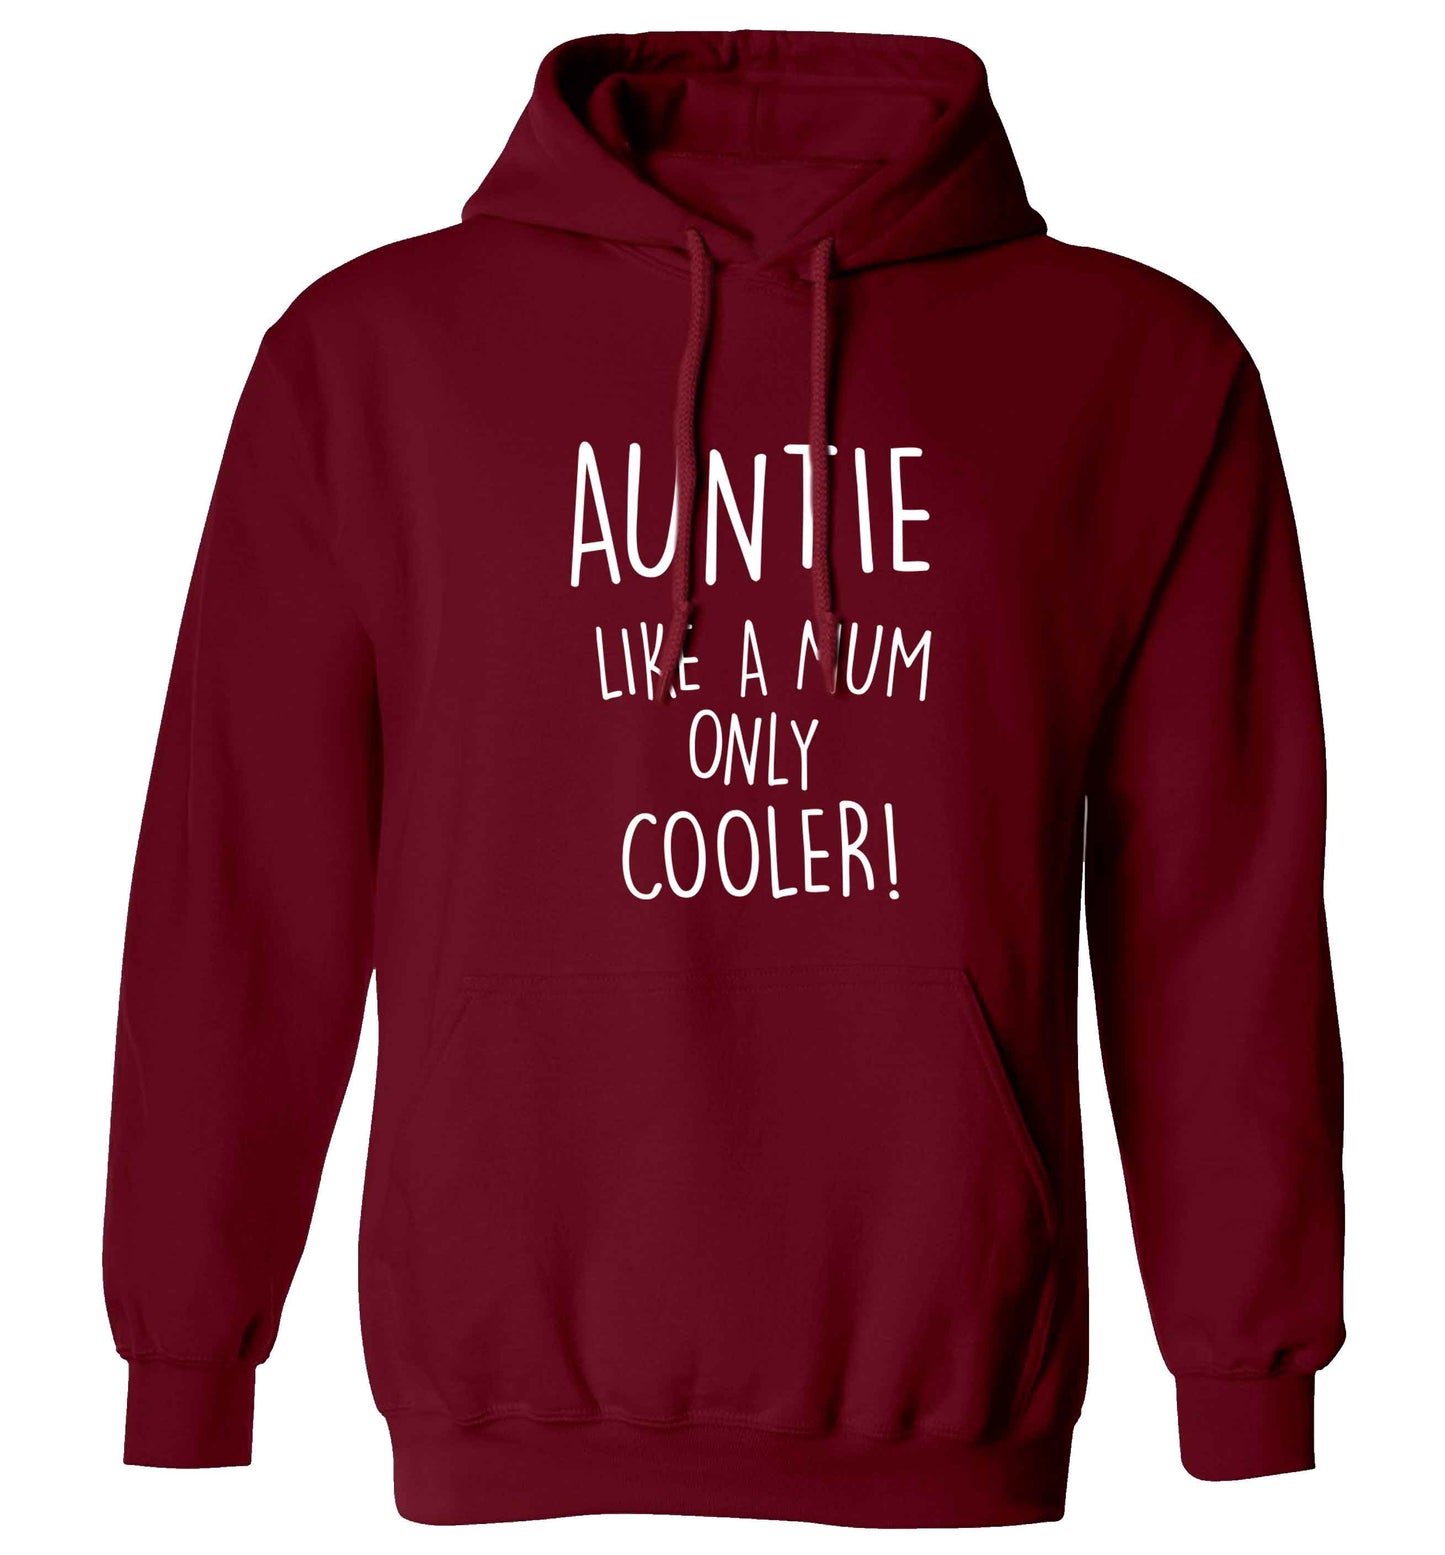 Auntie like a mum only cooler adults unisex maroon hoodie 2XL